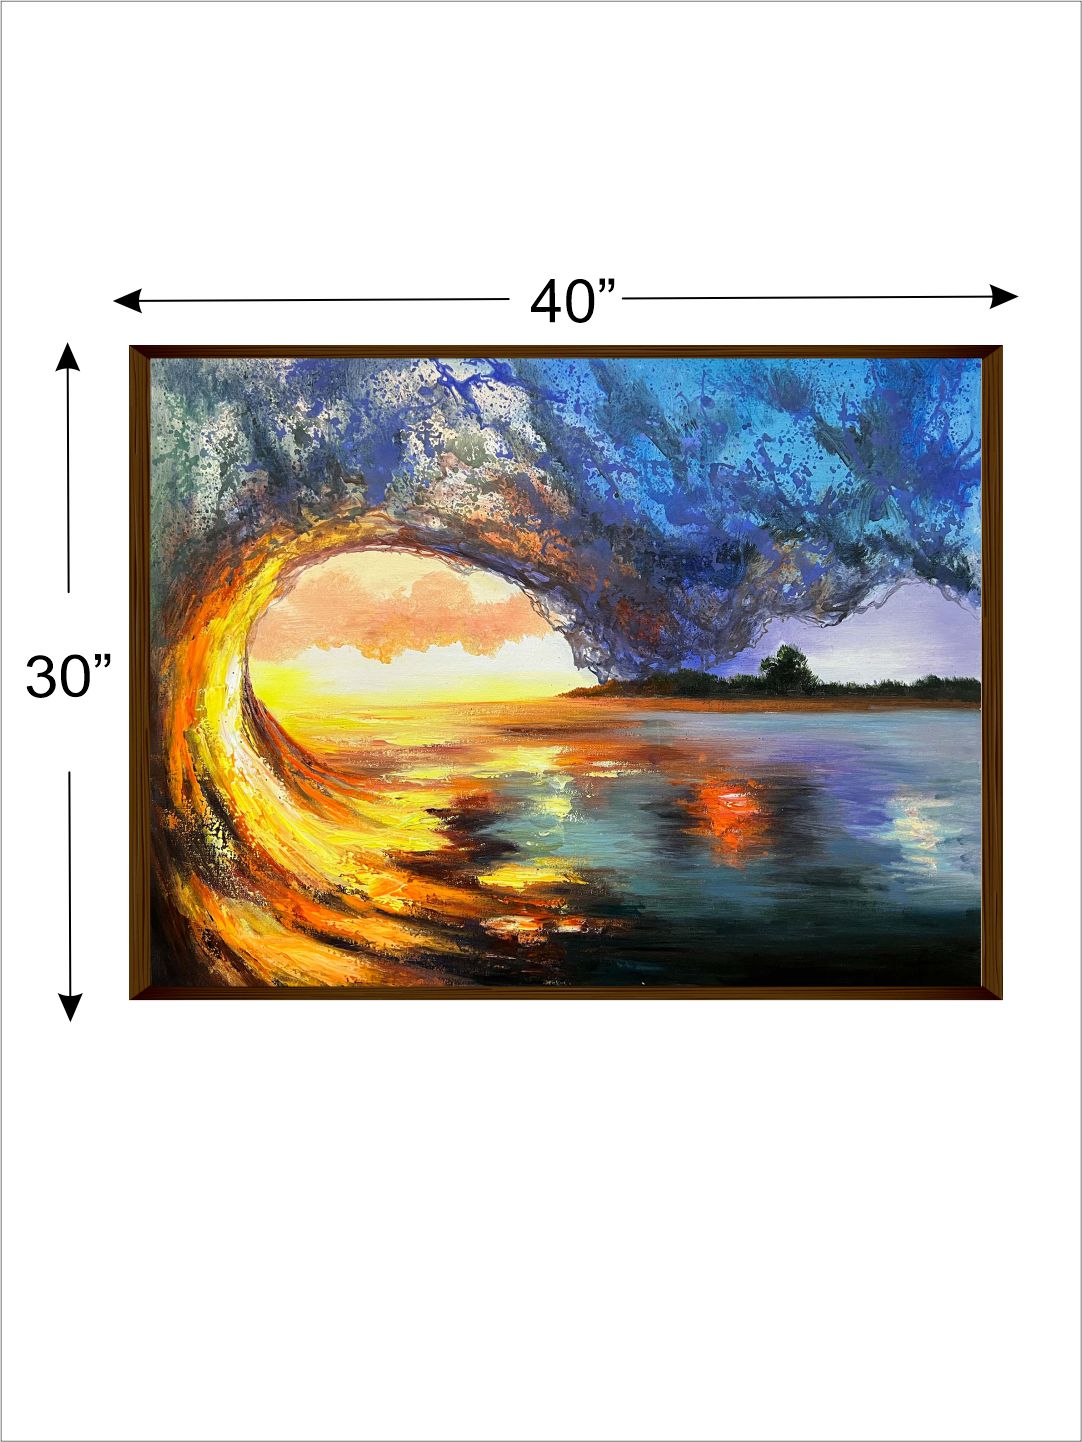 Sunset and Ocean - Wall Decor - 4